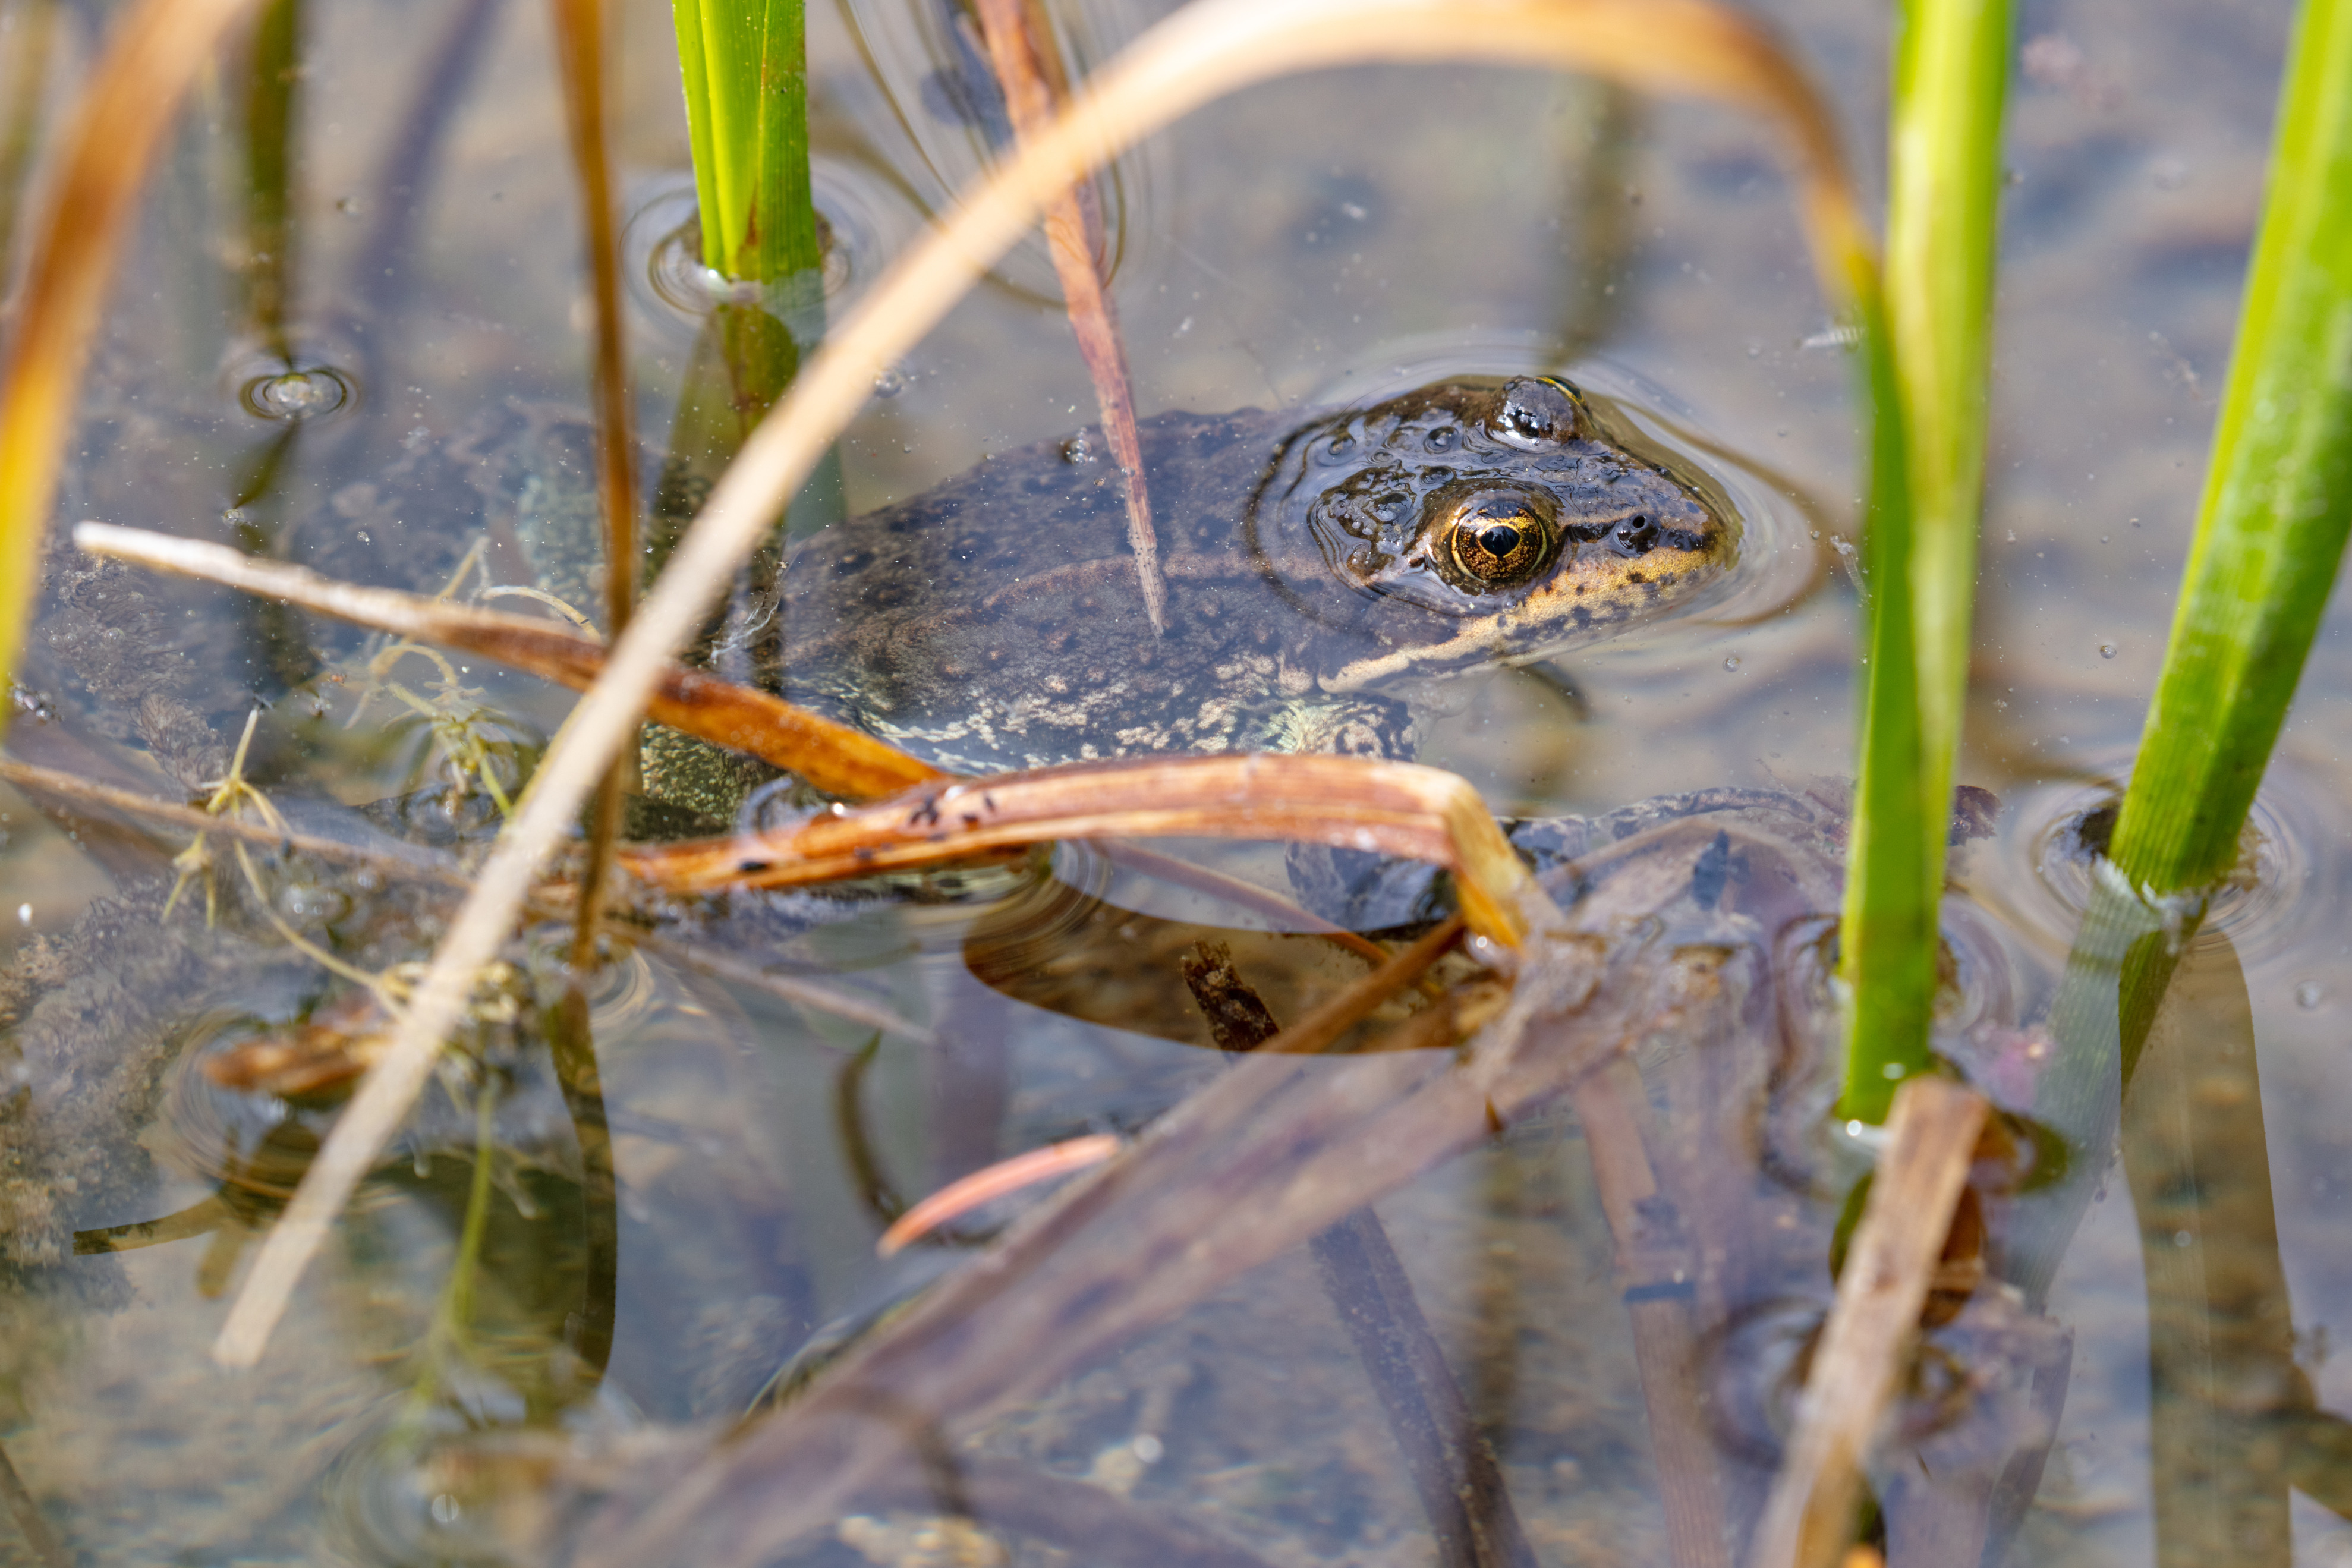 Frog surfaces in water